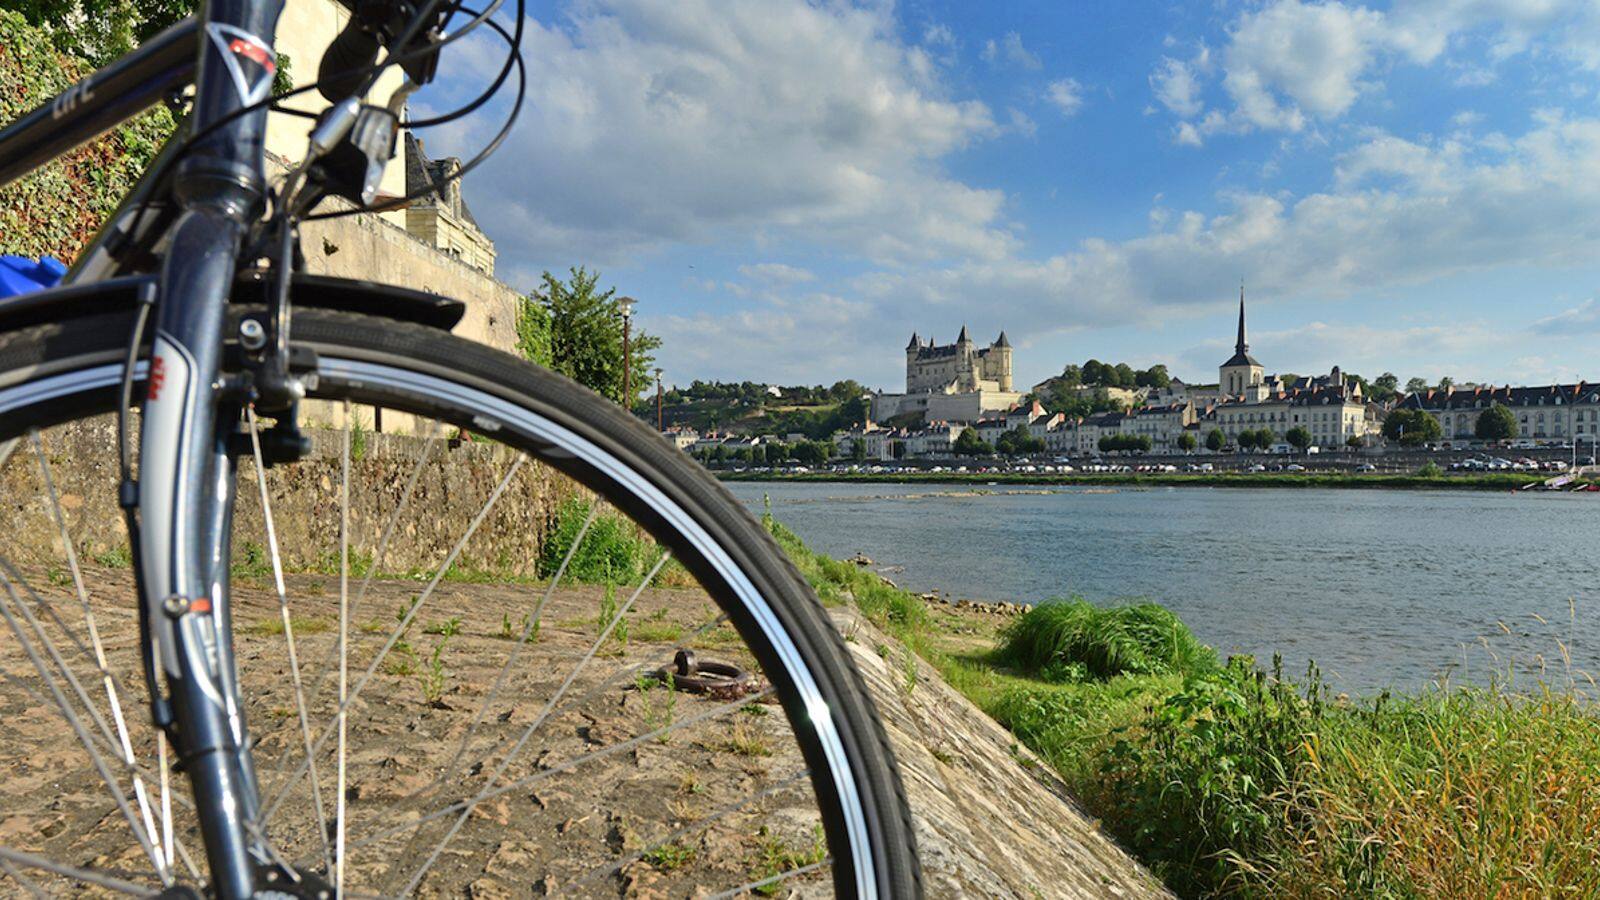 Pedal through the Loire Valley, France's scenic beauty